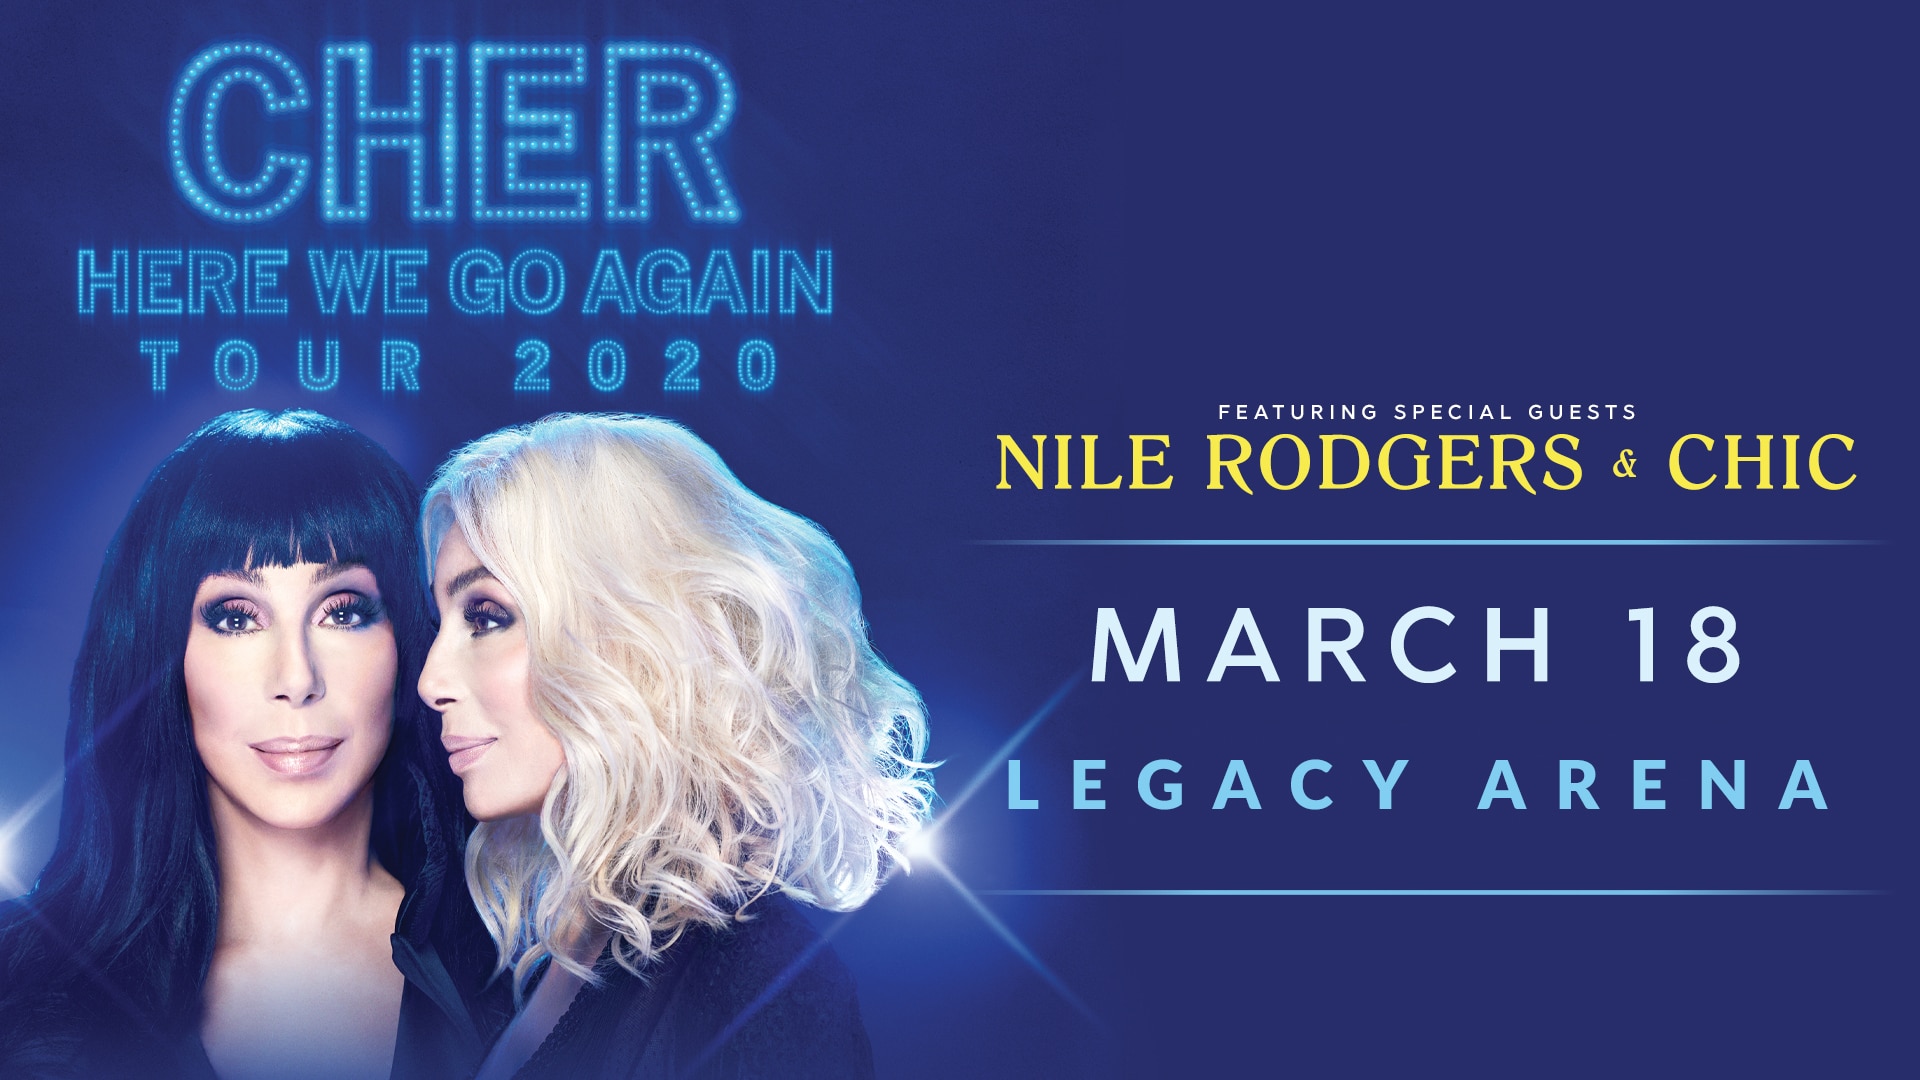 Cher HD 03 18 20 Chris Stapleton, Bassmaster Classic + more in March at Legacy Arena. Renovations start Apr. 2.